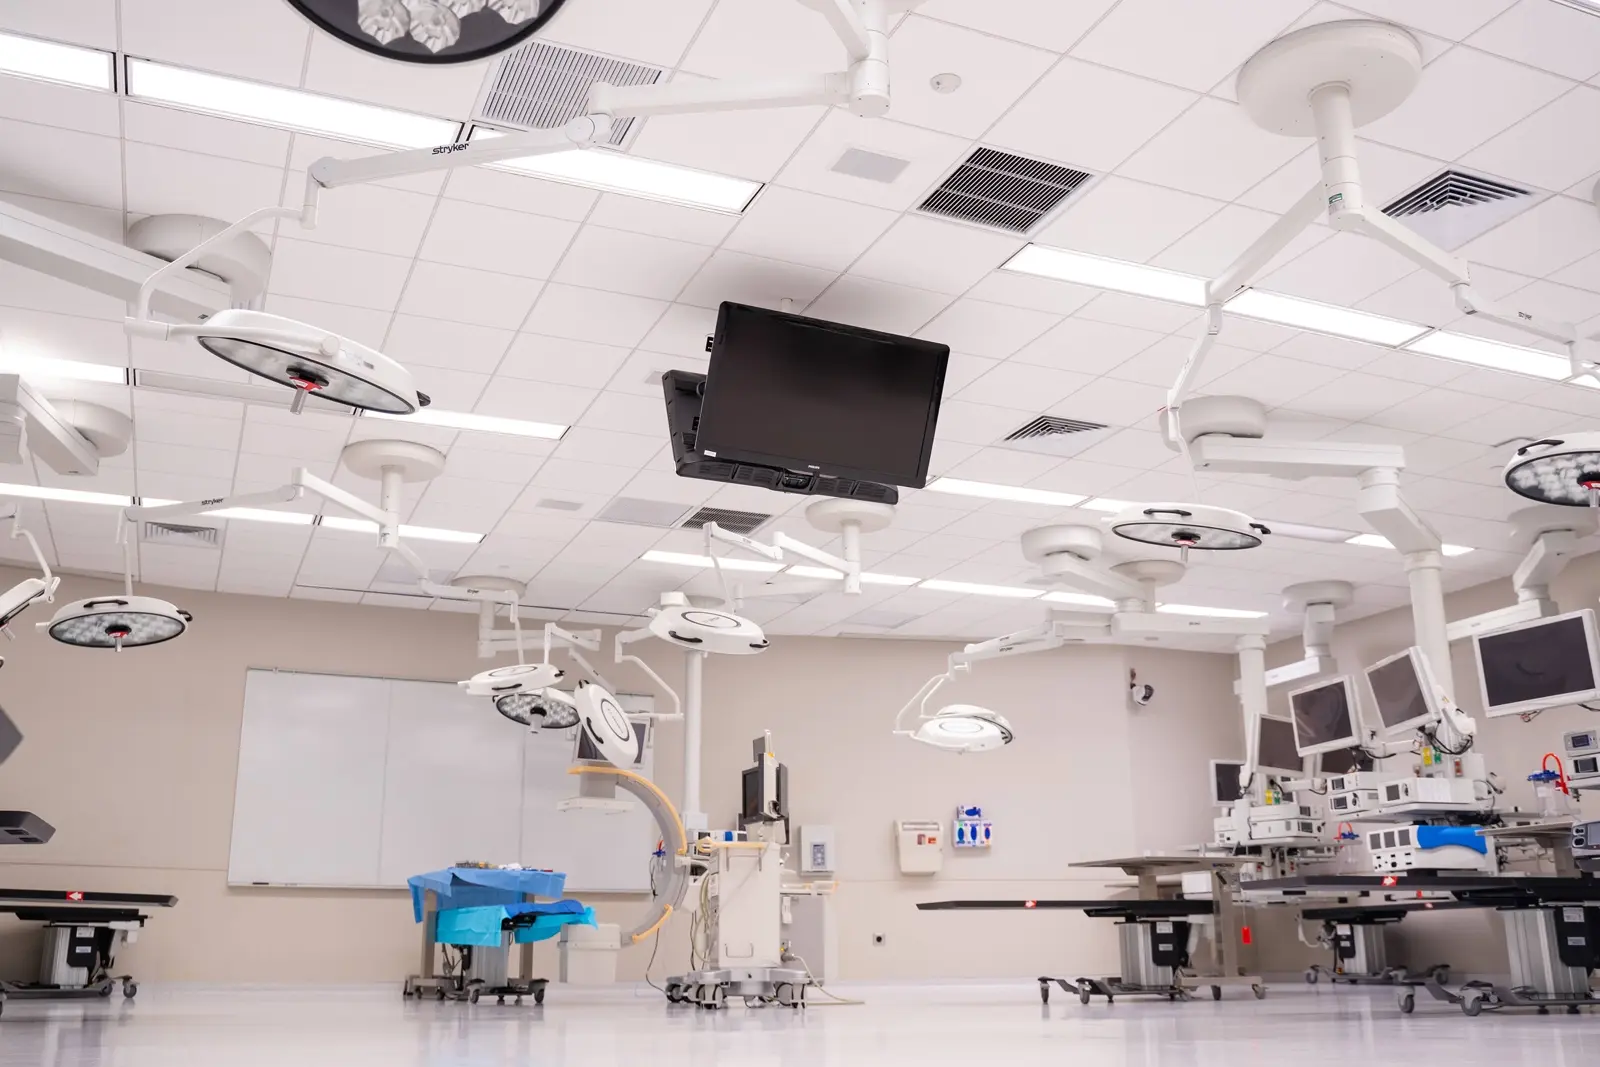 CAMLS A modern, clean, and brightly lit hospital operating room. The room features multiple surgical lights, flat-screen monitors, operating tables, and various advanced medical equipment. The walls are neutral in color, and there is a whiteboard in the background.